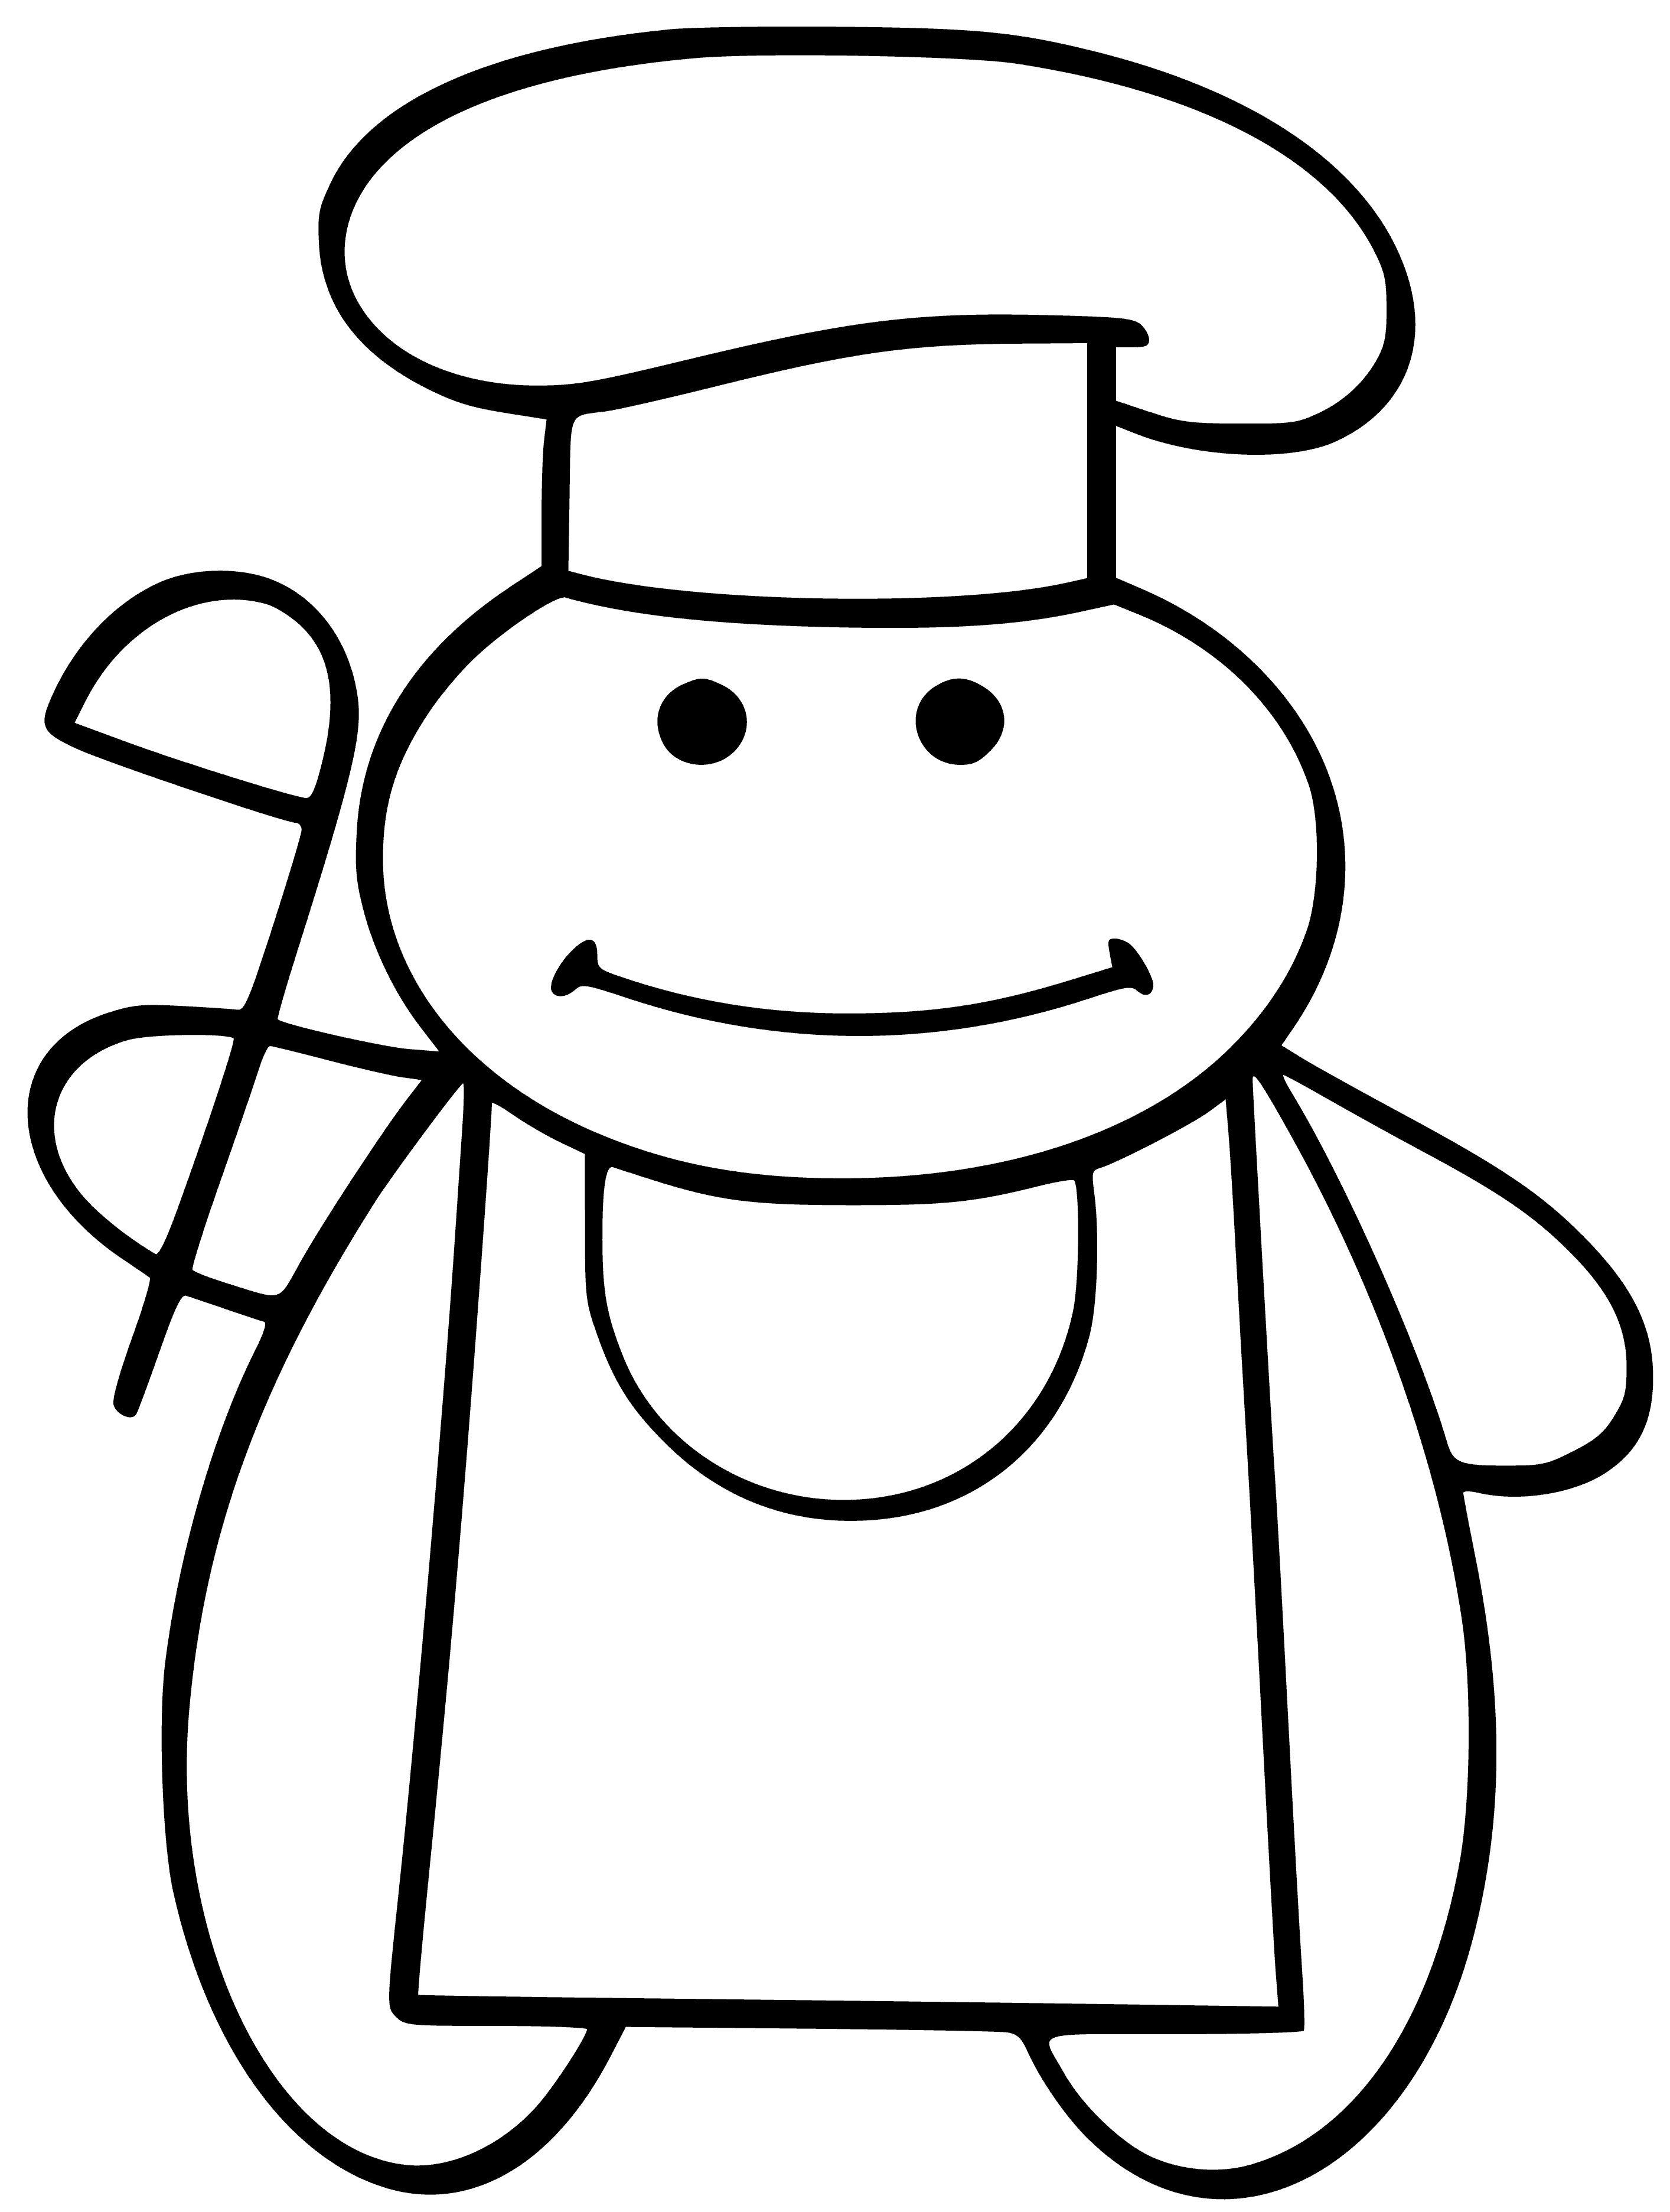 coloring page: A cook is someone who works in a kitchen and prepares meals according to a recipe. They have a passion for food and the ability to create delicious meals.